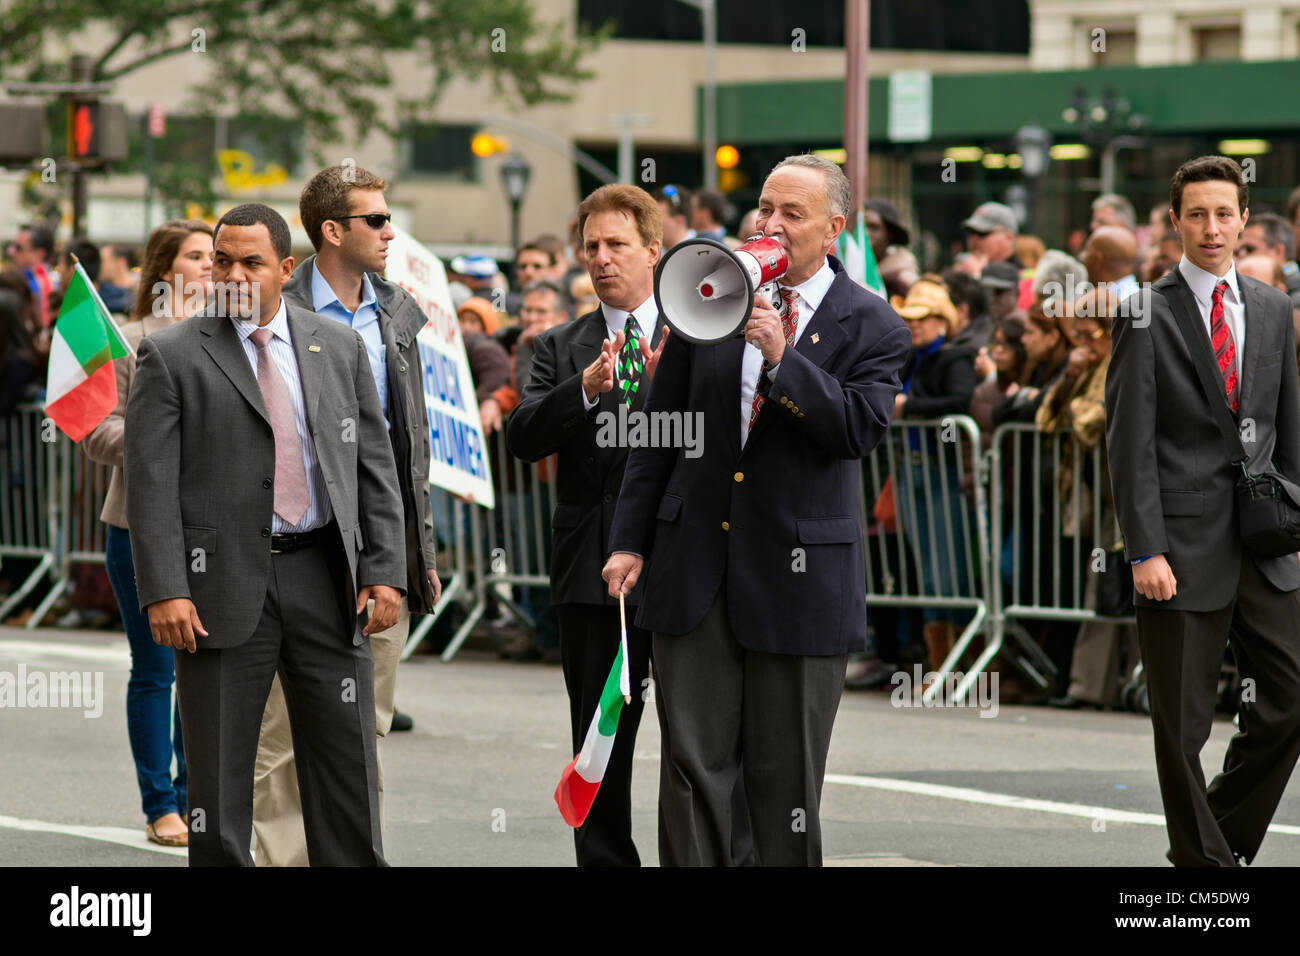 New York, NY, October 8, 2012.  US Senator Charles Schumer (Democrat of New York) alks to the crowd through a bullhorn during New York City's annual Columbus Day parade up 5th Avenue. Stock Photo